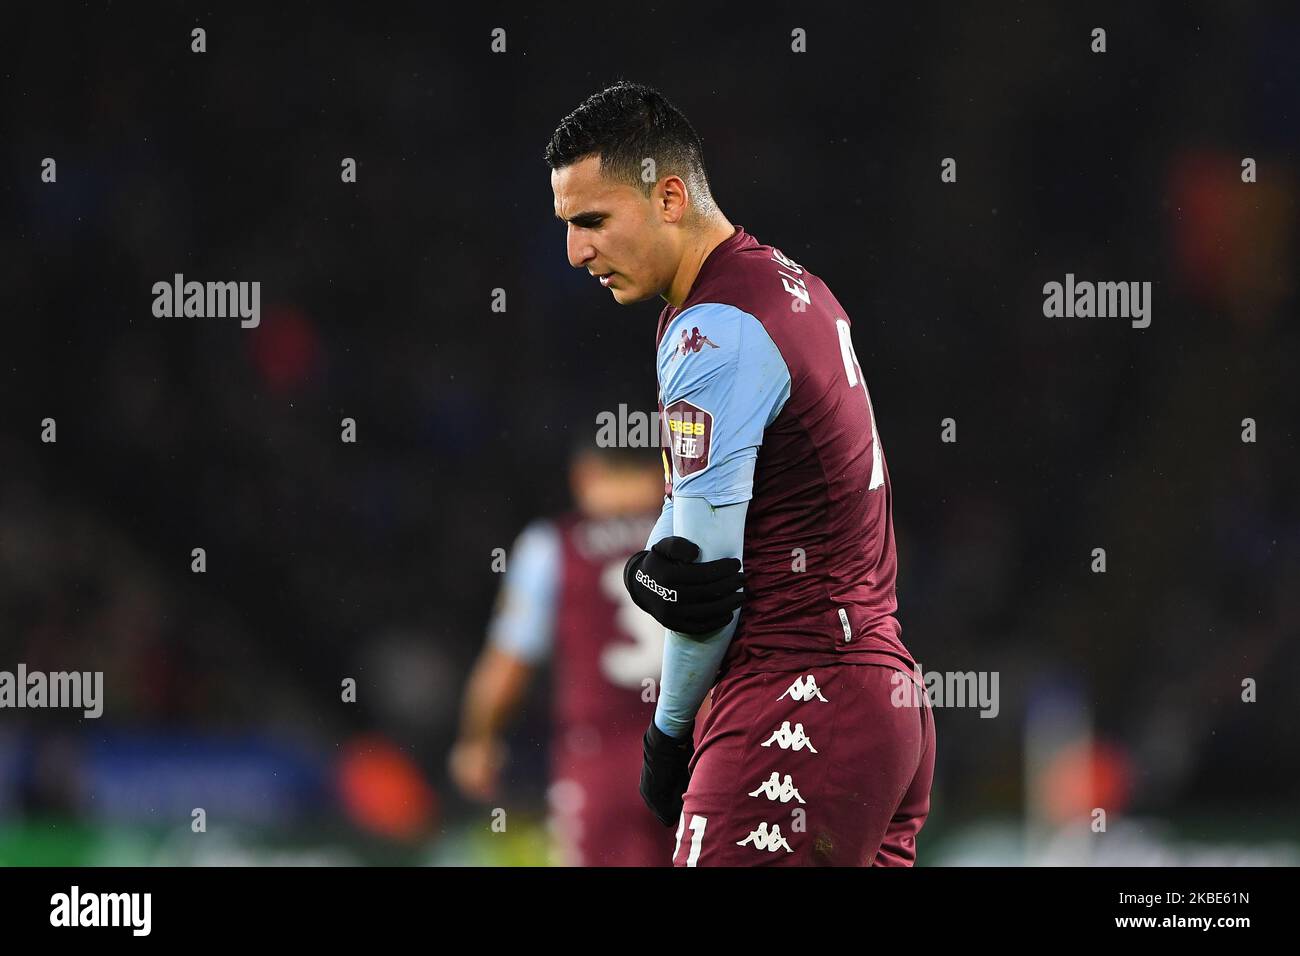 Anwar El Ghazi (21) of Aston Villa holds his arm after suffering a knock during the Carabao Cup Semi Final 1st Leg between Leicester City and Aston Villa at the King Power Stadium, Leicester on Wednesday 8th January 2020. (Photo by Jon Hobley/MI News/NurPhoto) Stock Photo